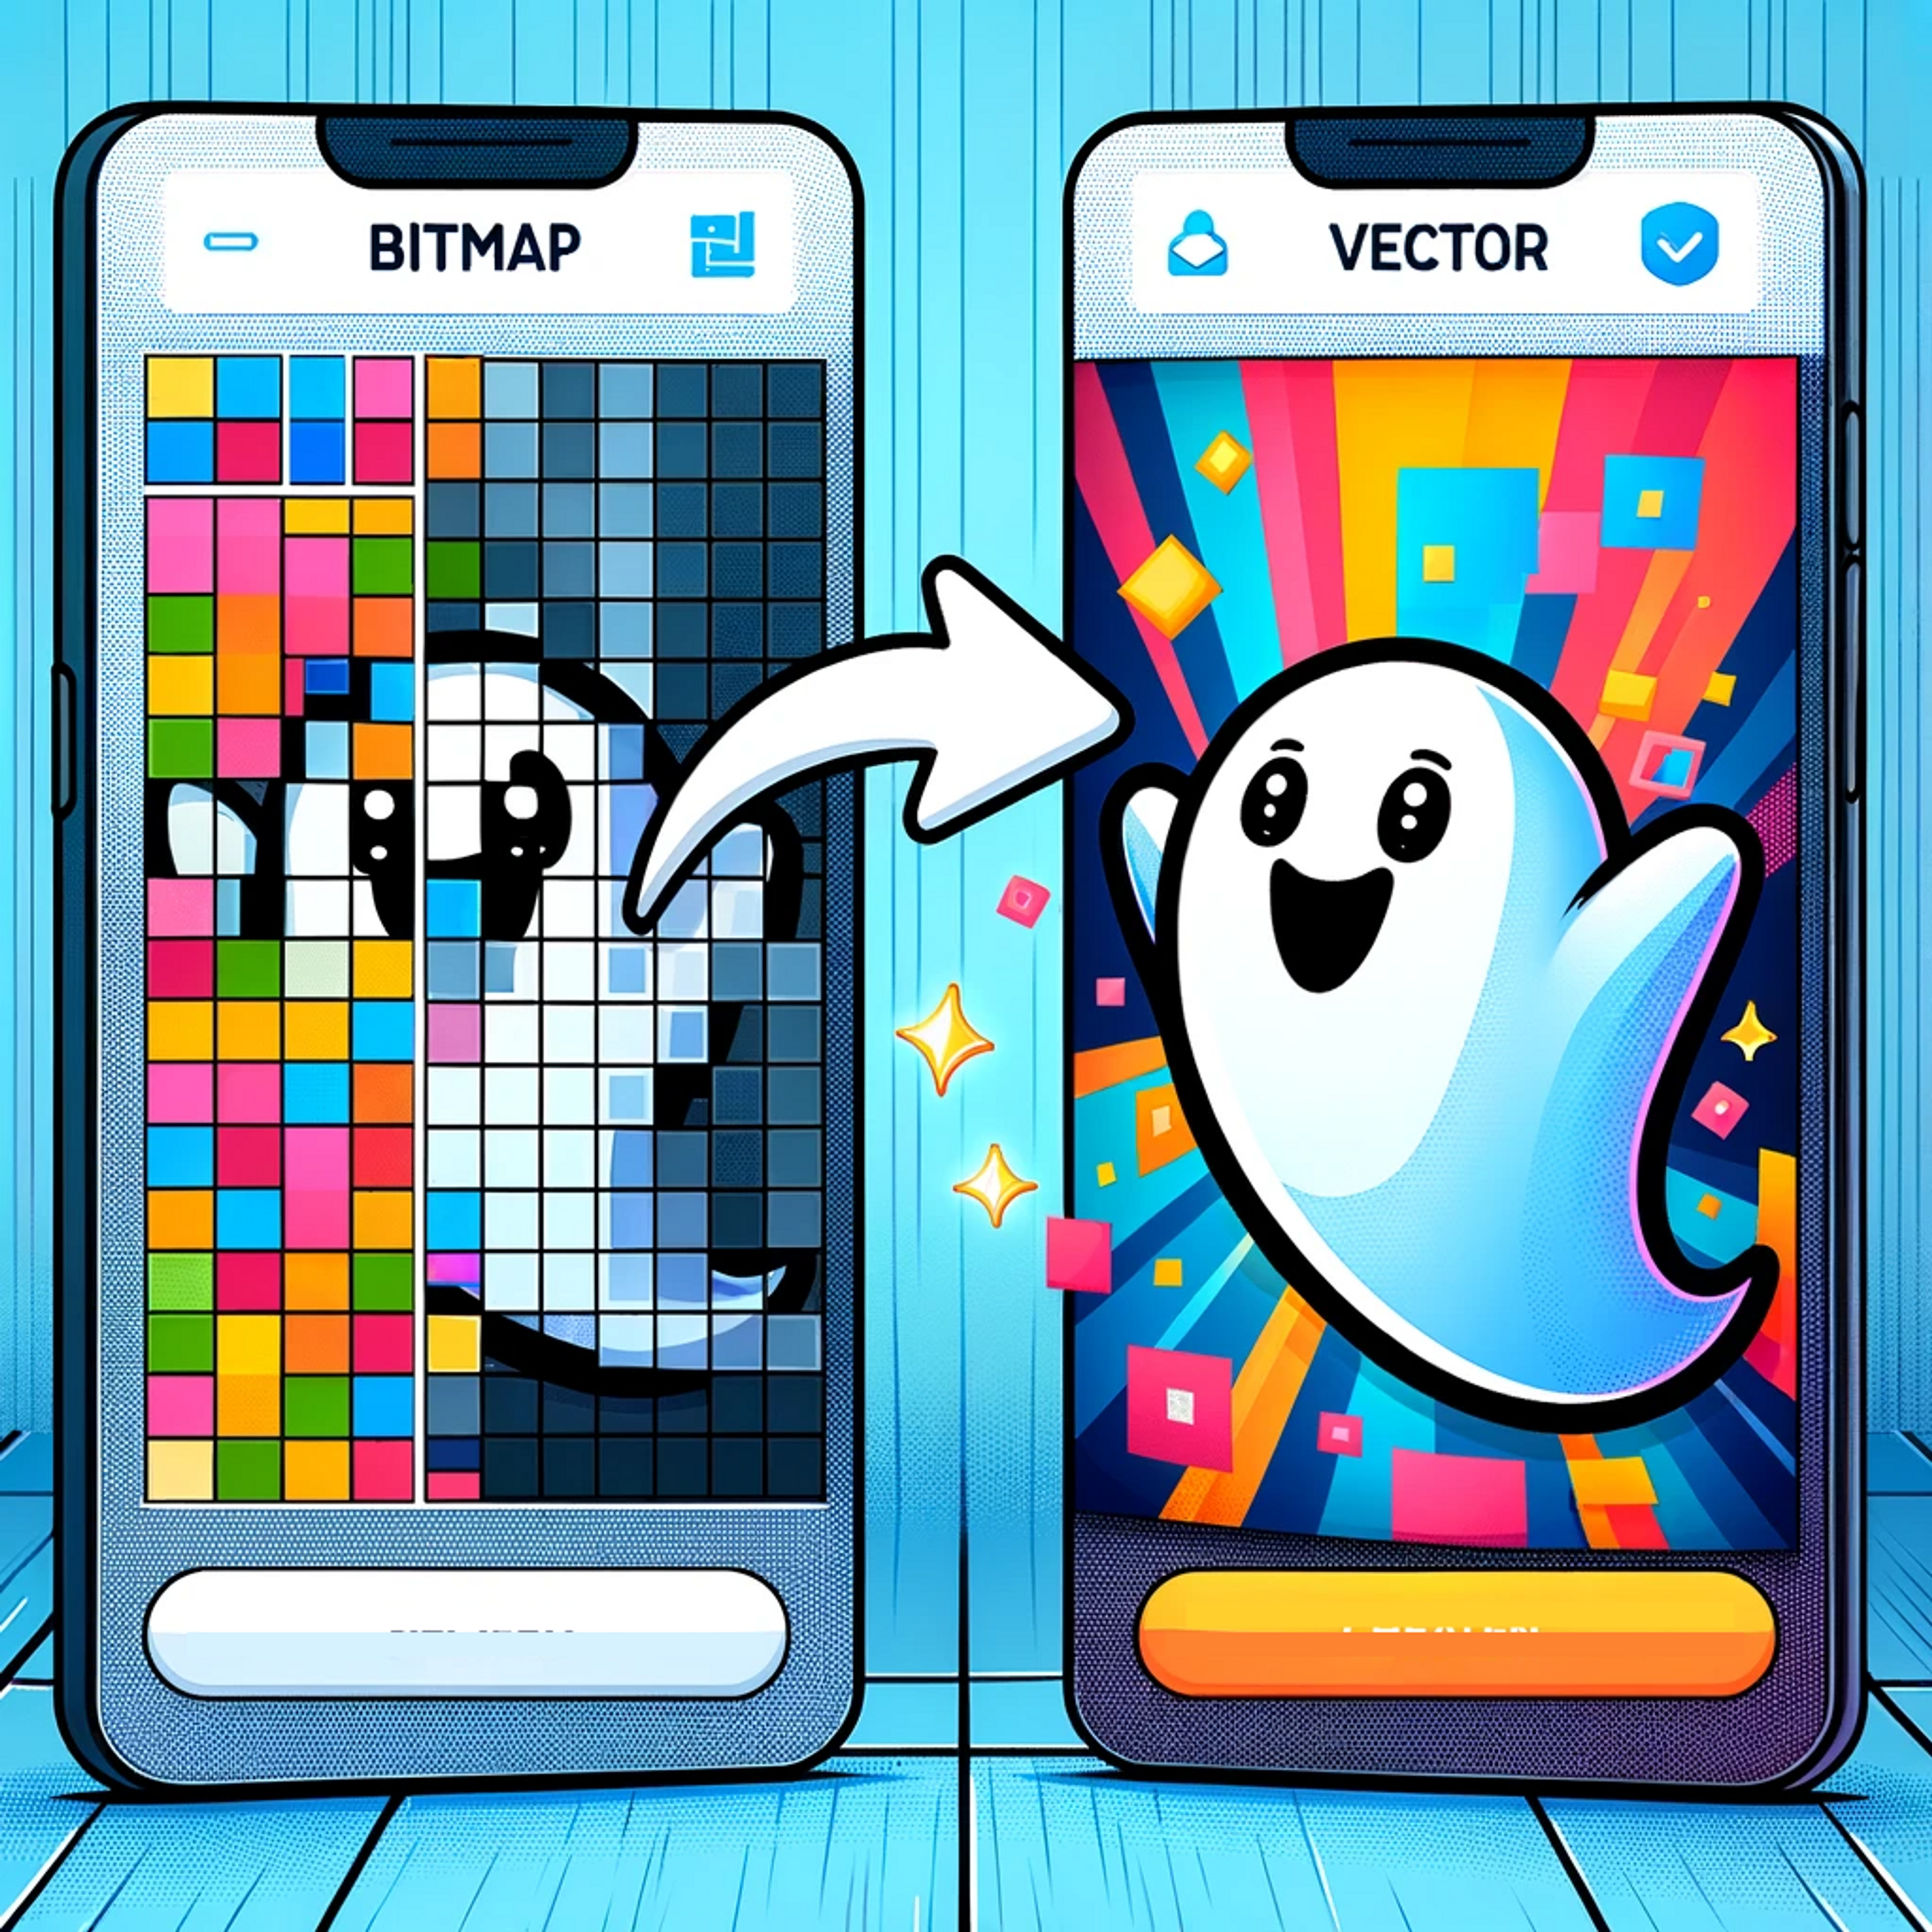 Cartoon-style illustration showing the transformation from a bitmap to a vector image. On the left half, the image is pixelated with discernible colour